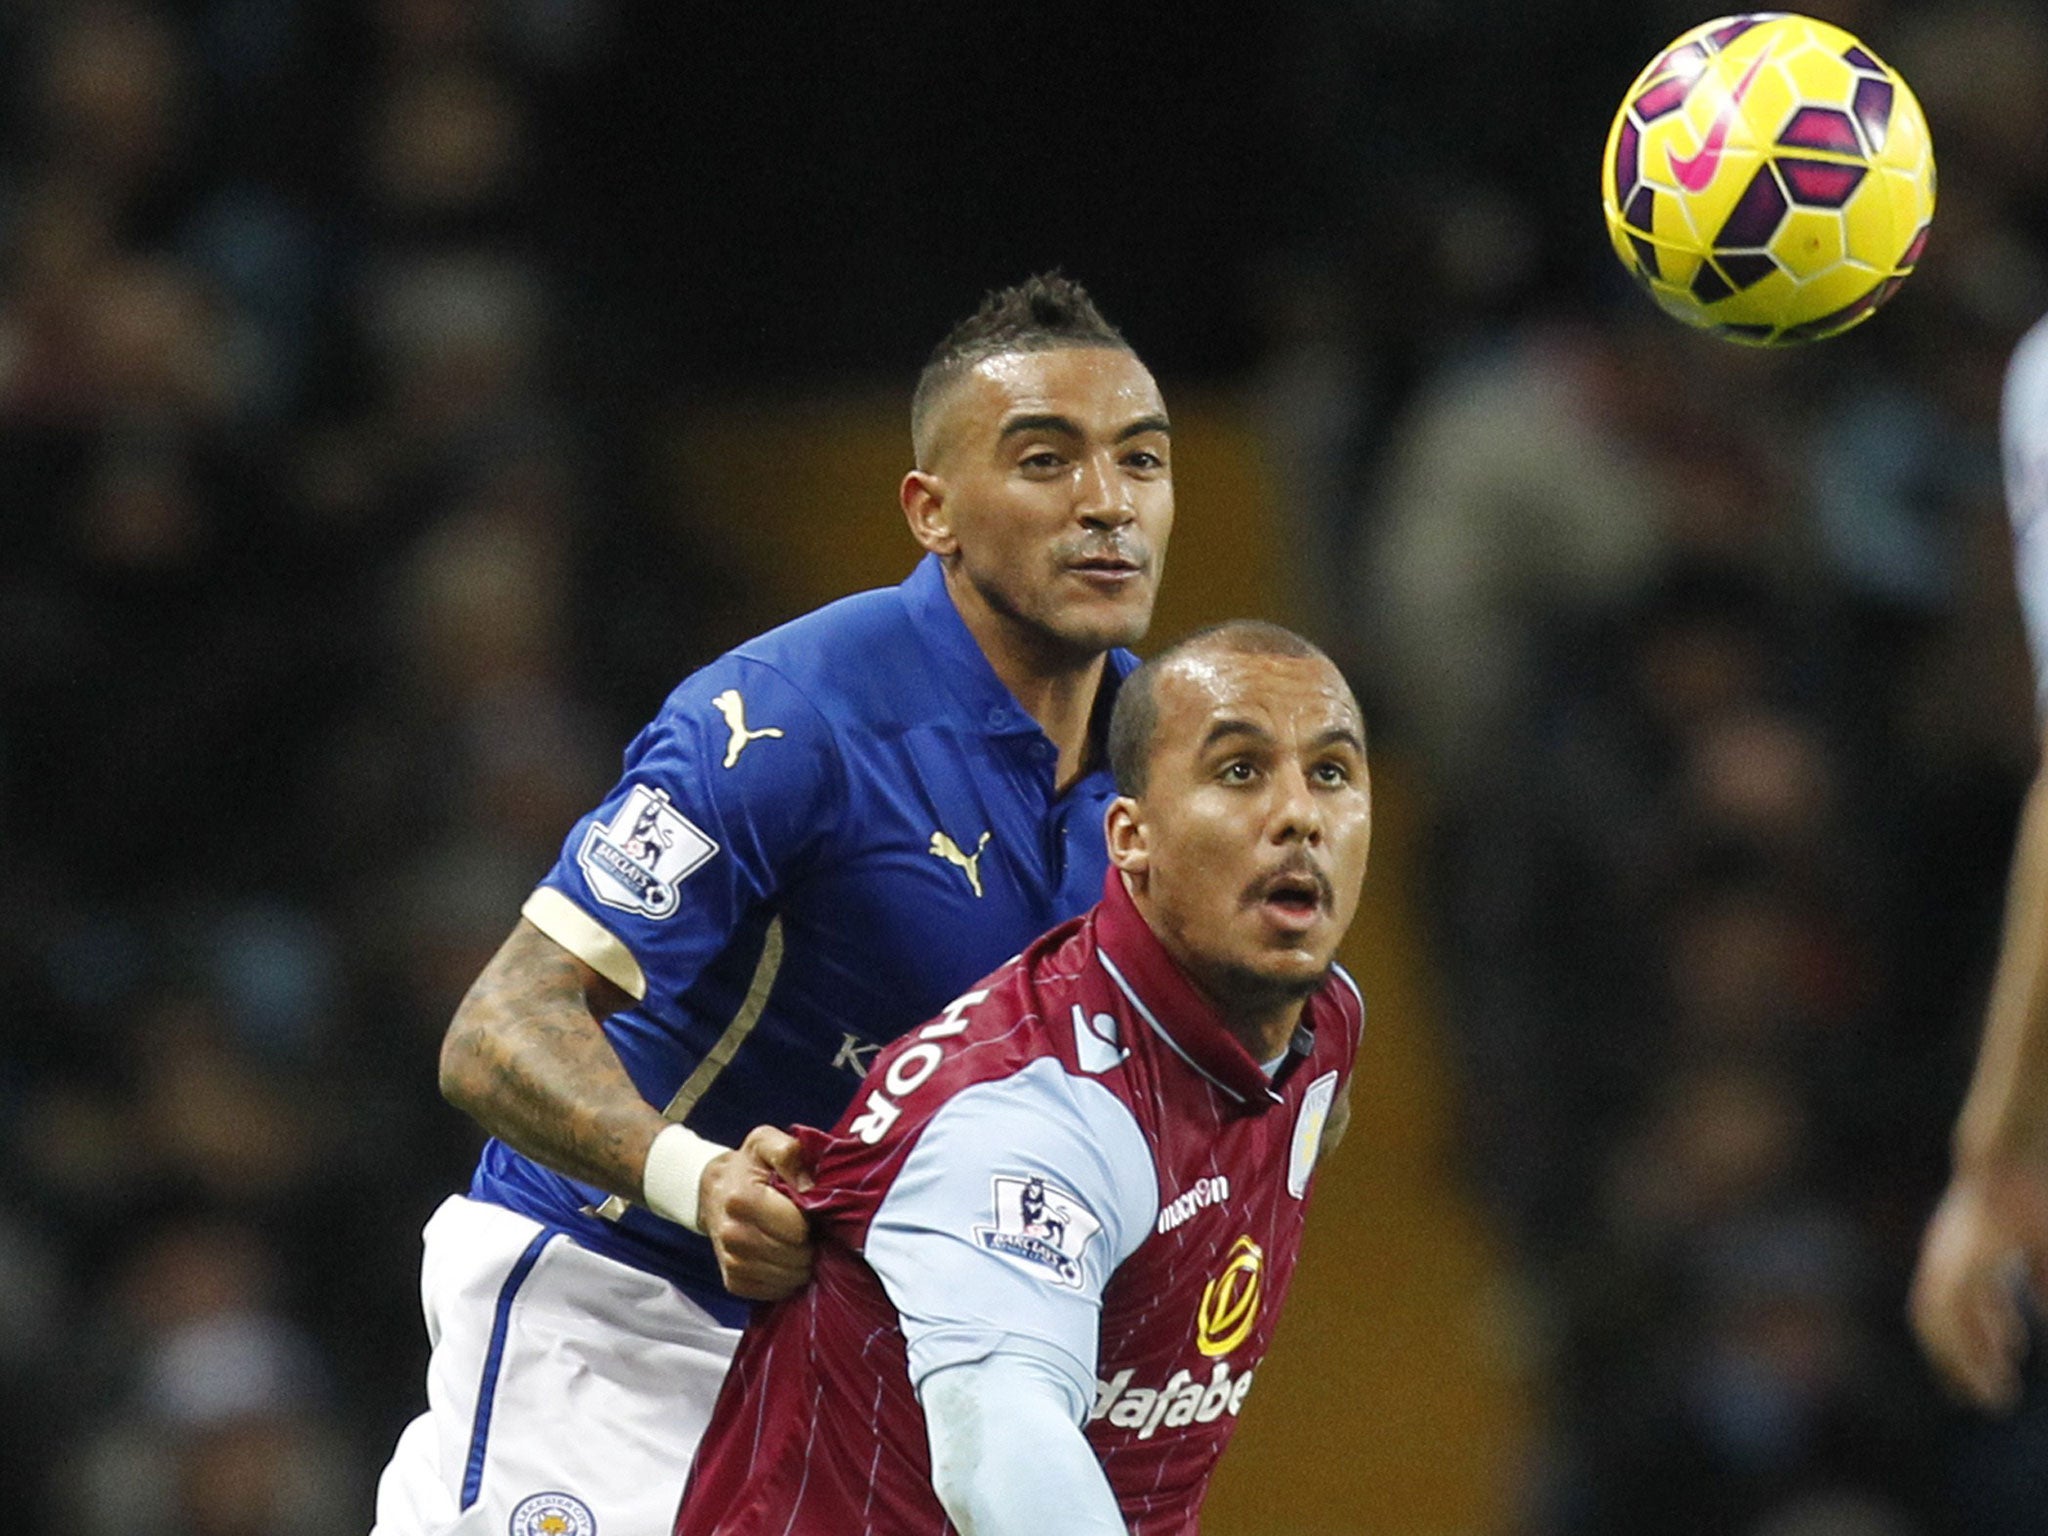 Aston Villa's Gabriel Agbonlahor competes with Leicester's Danny Simpson for the ball